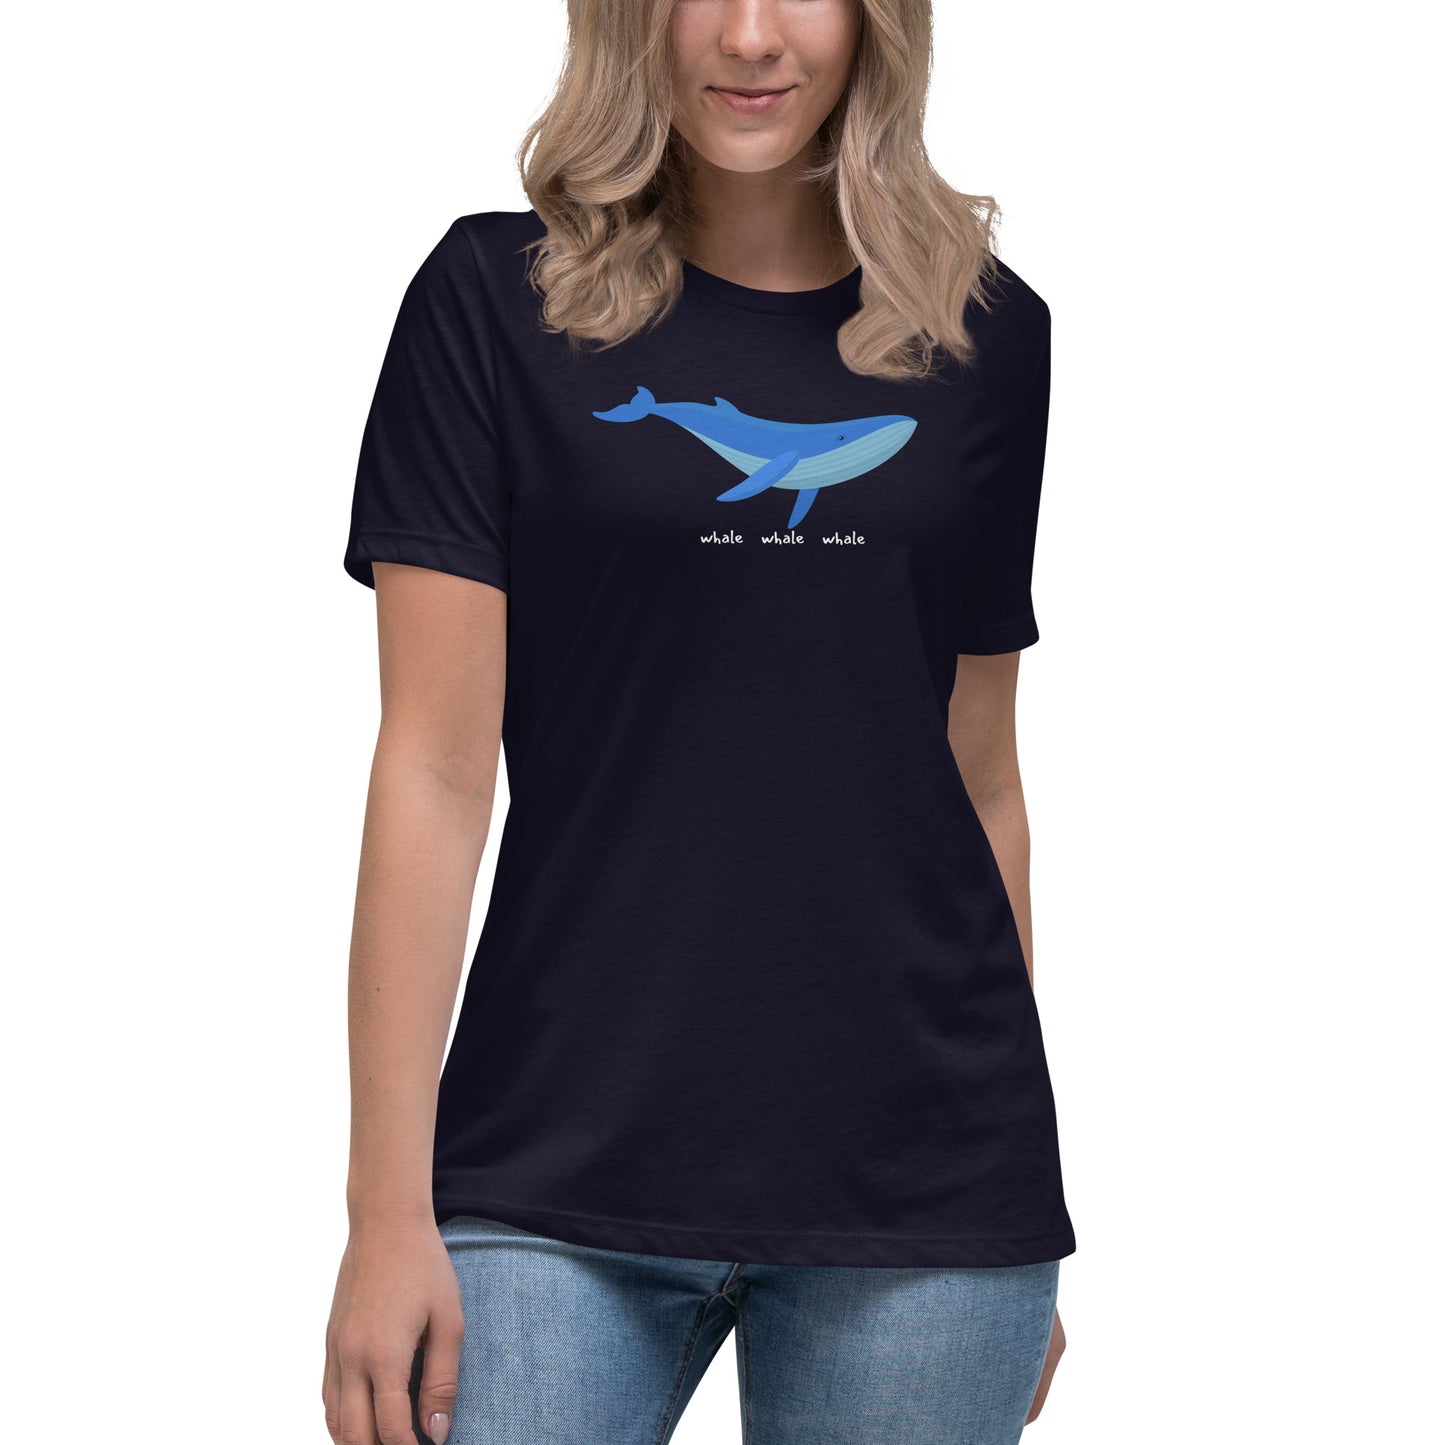 Whale Whale Whale Women's Relaxed T-Shirt, Funny Nautical Shirt, Whale Lover Shirt